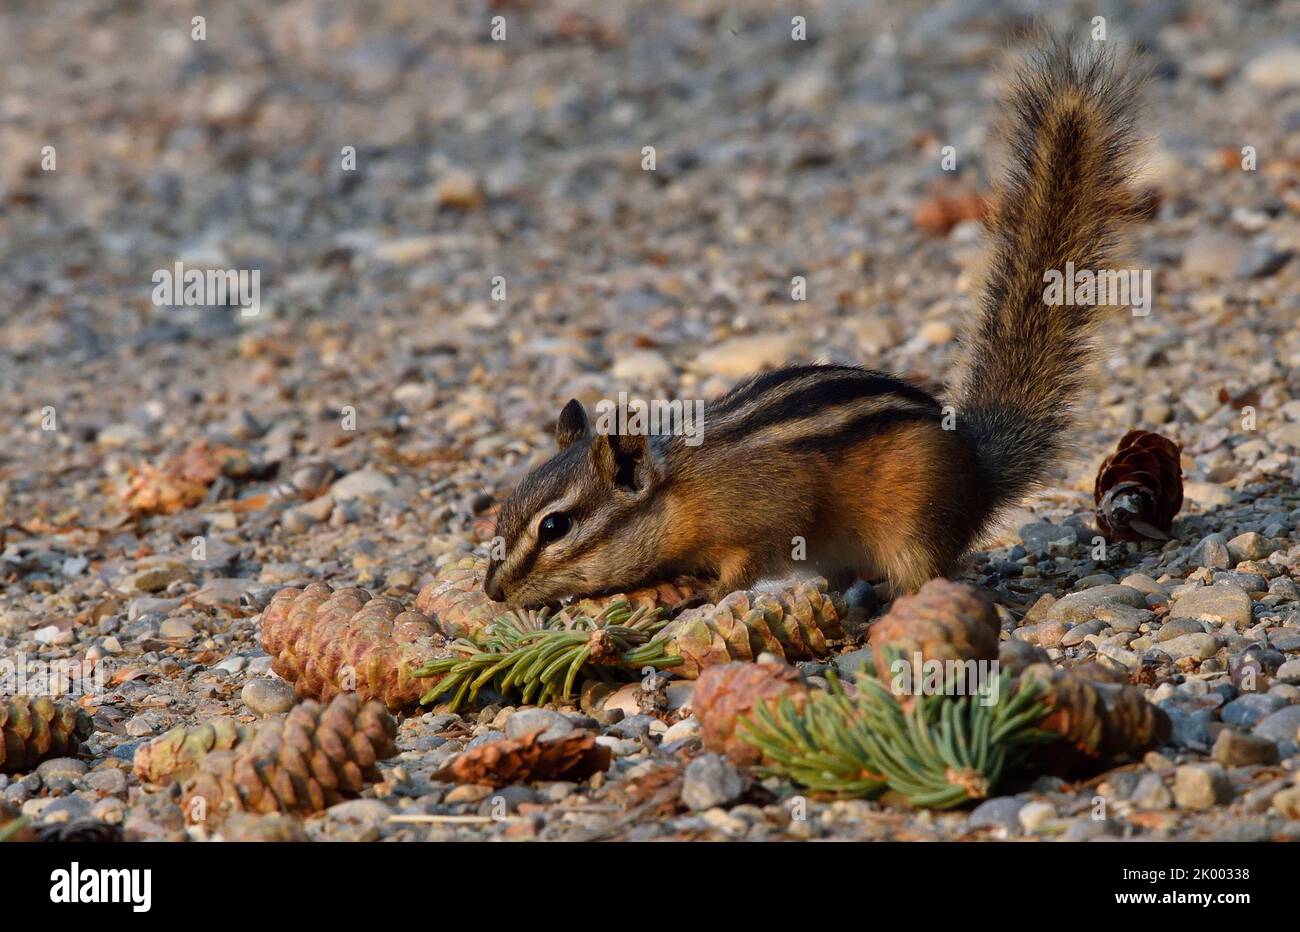 A wild least chipmunk, 'Eutamias minimus',foraging through spruce cones that a red squirrel has dropped from a spruce tree. Stock Photo